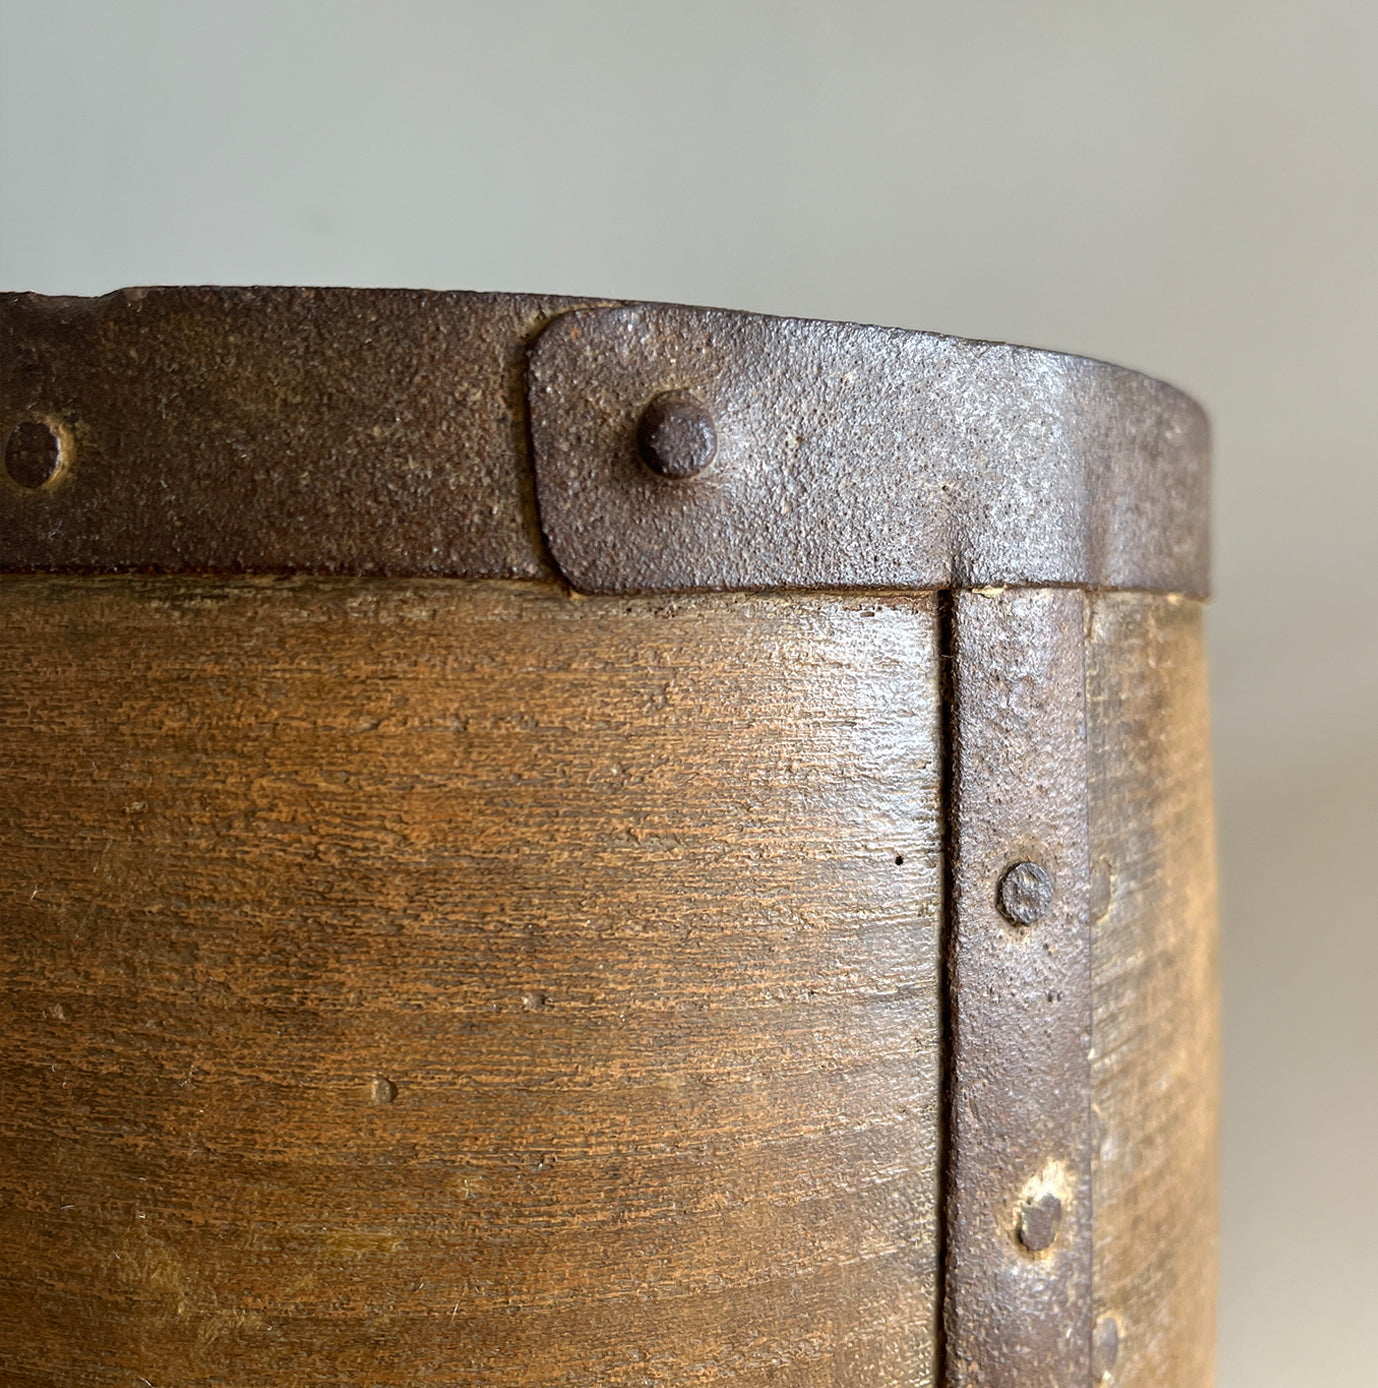 A Georgian Grain Measure. Constructed from yew wood with metal strapping. Marked with the Georgian Crown and the word 'GALLON' and the numeral '17'. These vessels were used to measure out grain in general stores and grain merchants - SHOP NOW - www.intovontage.co.uk